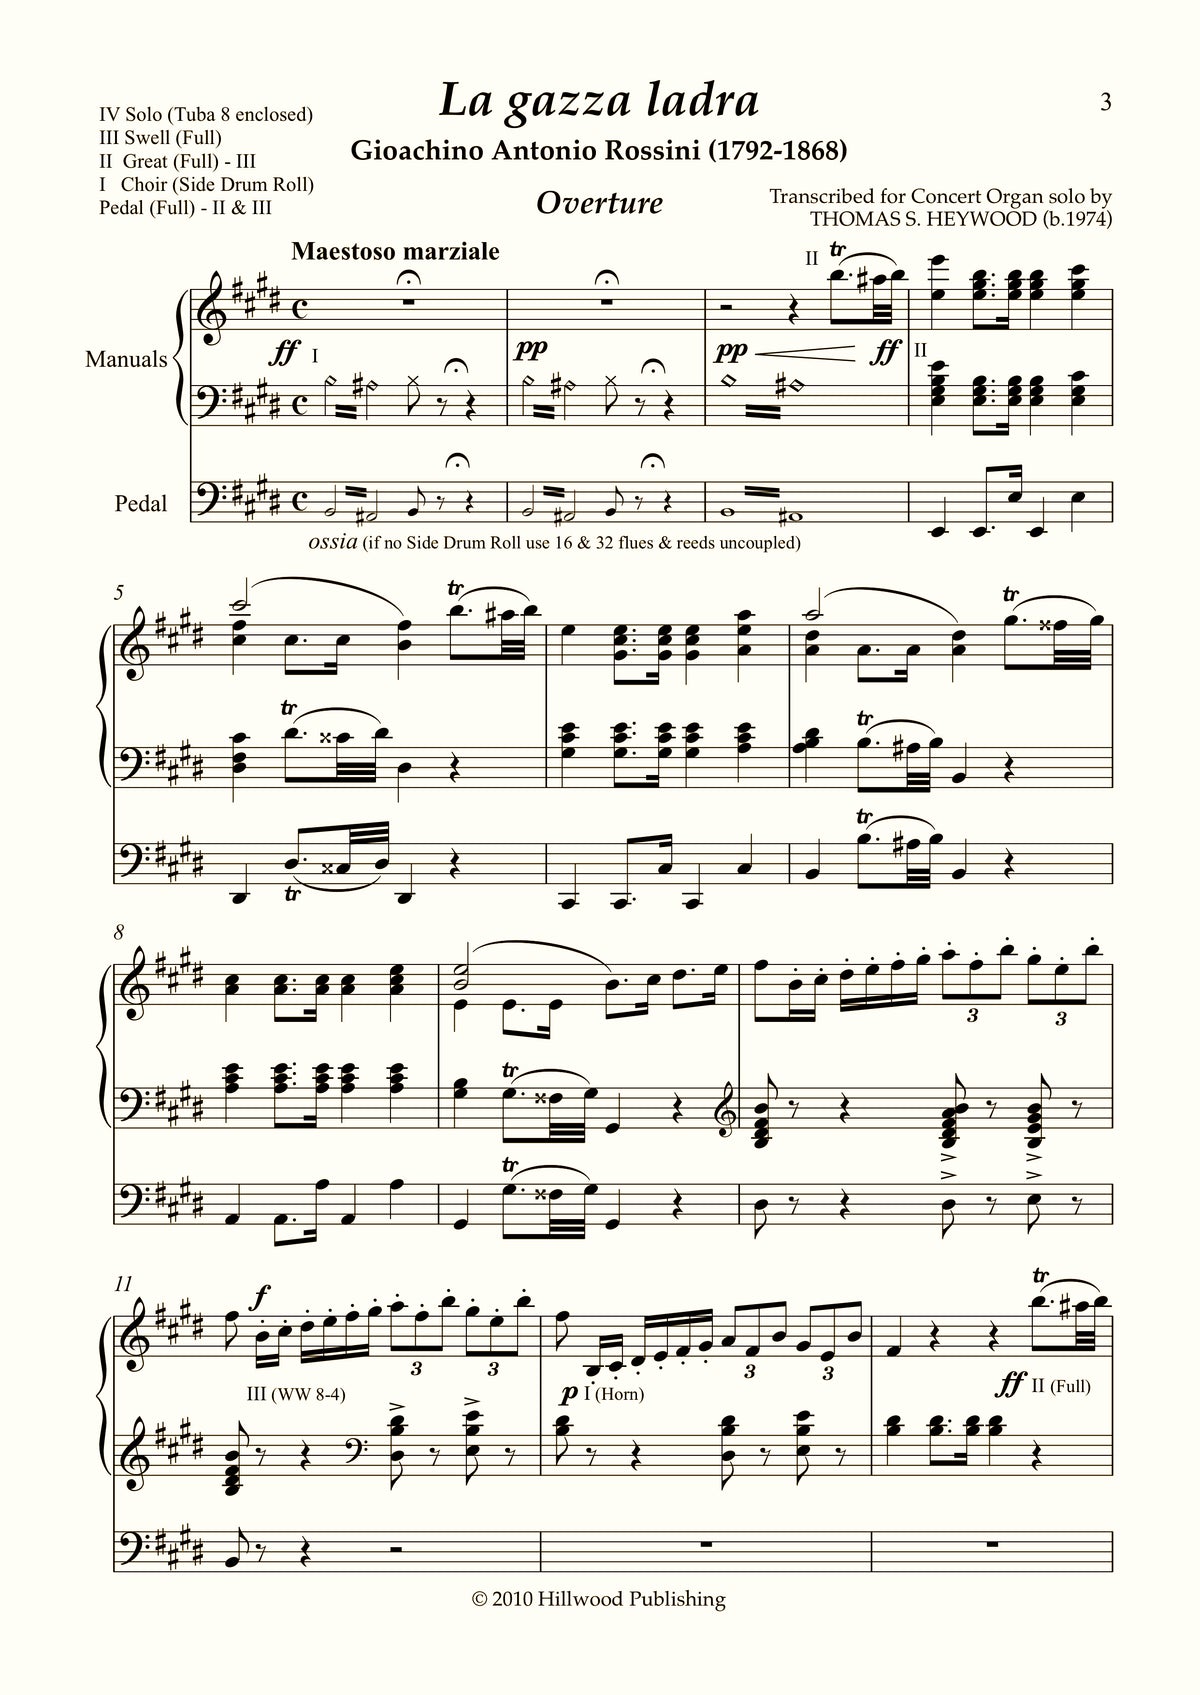 Rossini/Heywood - Overture to The Thieving Magpie (Score) - Concert Organ International